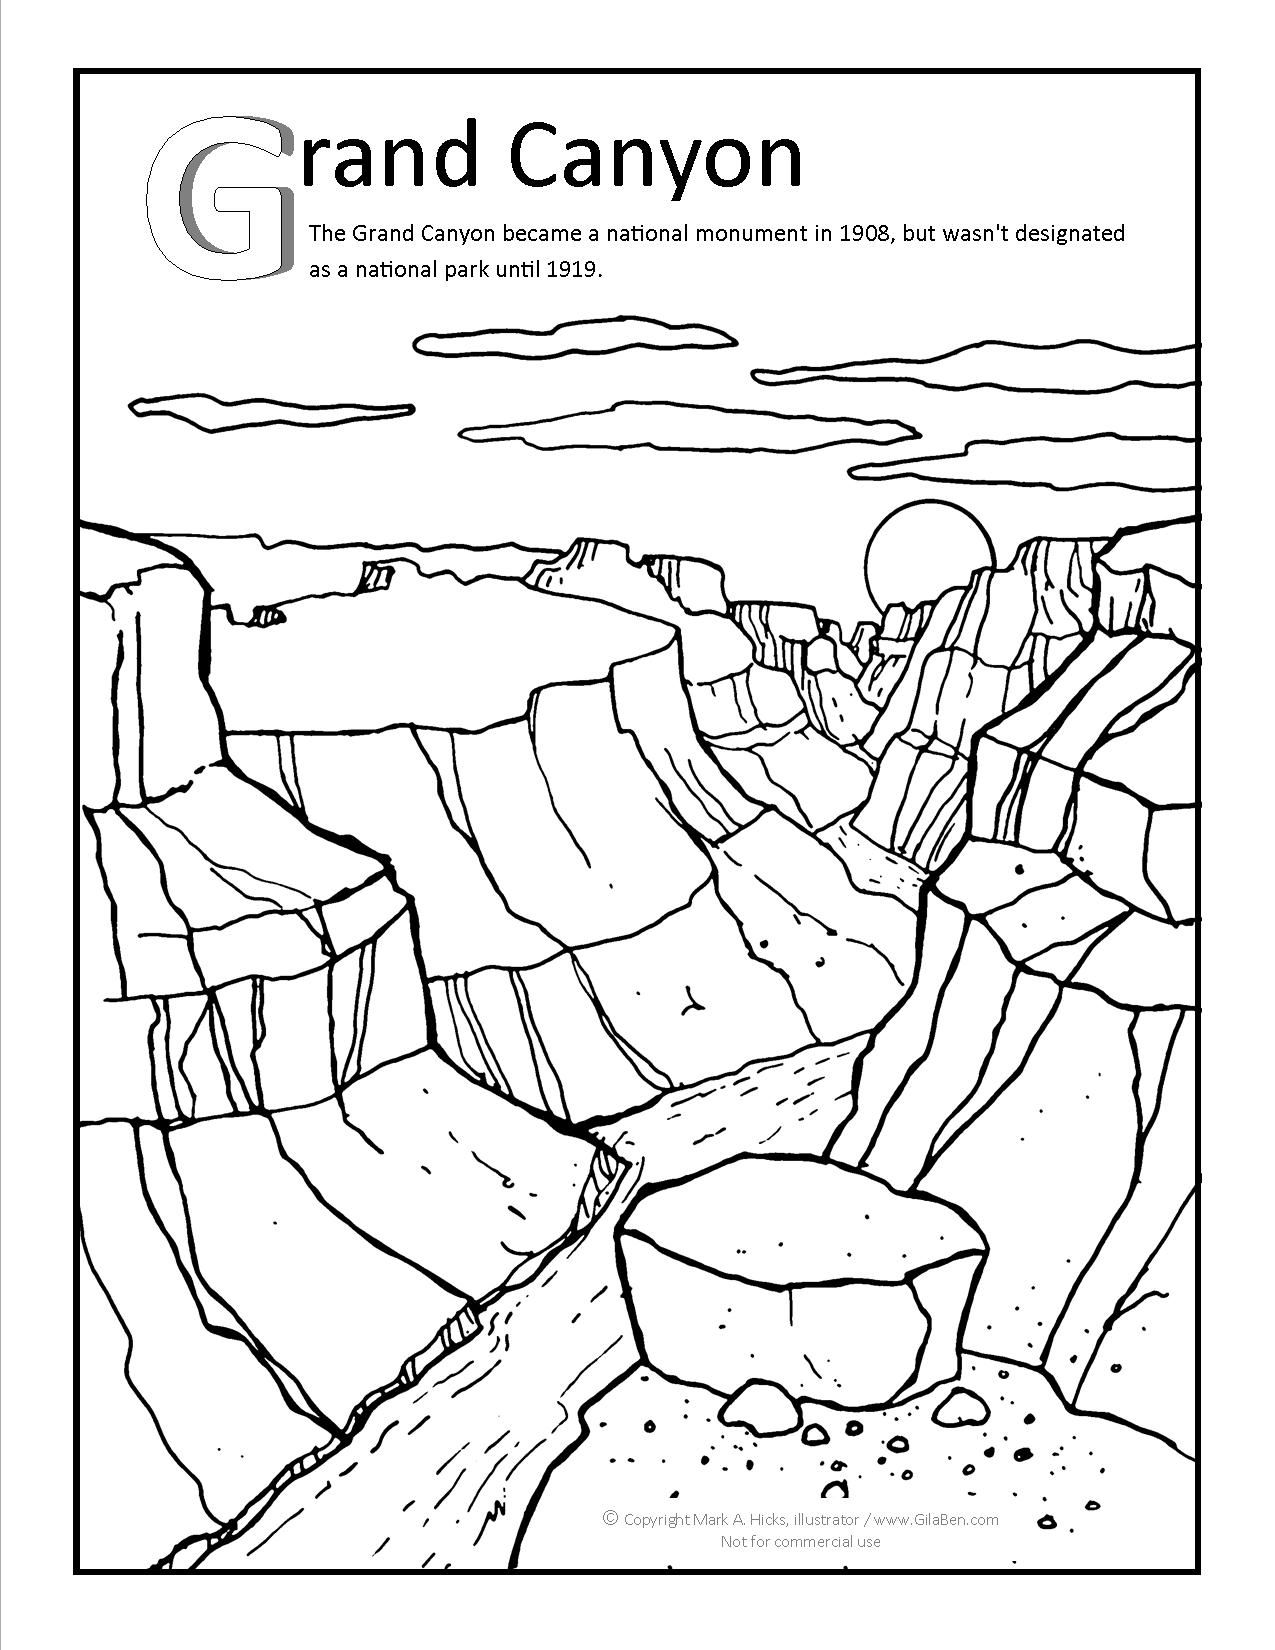 Grand Canyon Coloring Page | Grand canyon, Grand canyon activities, Coloring  pages